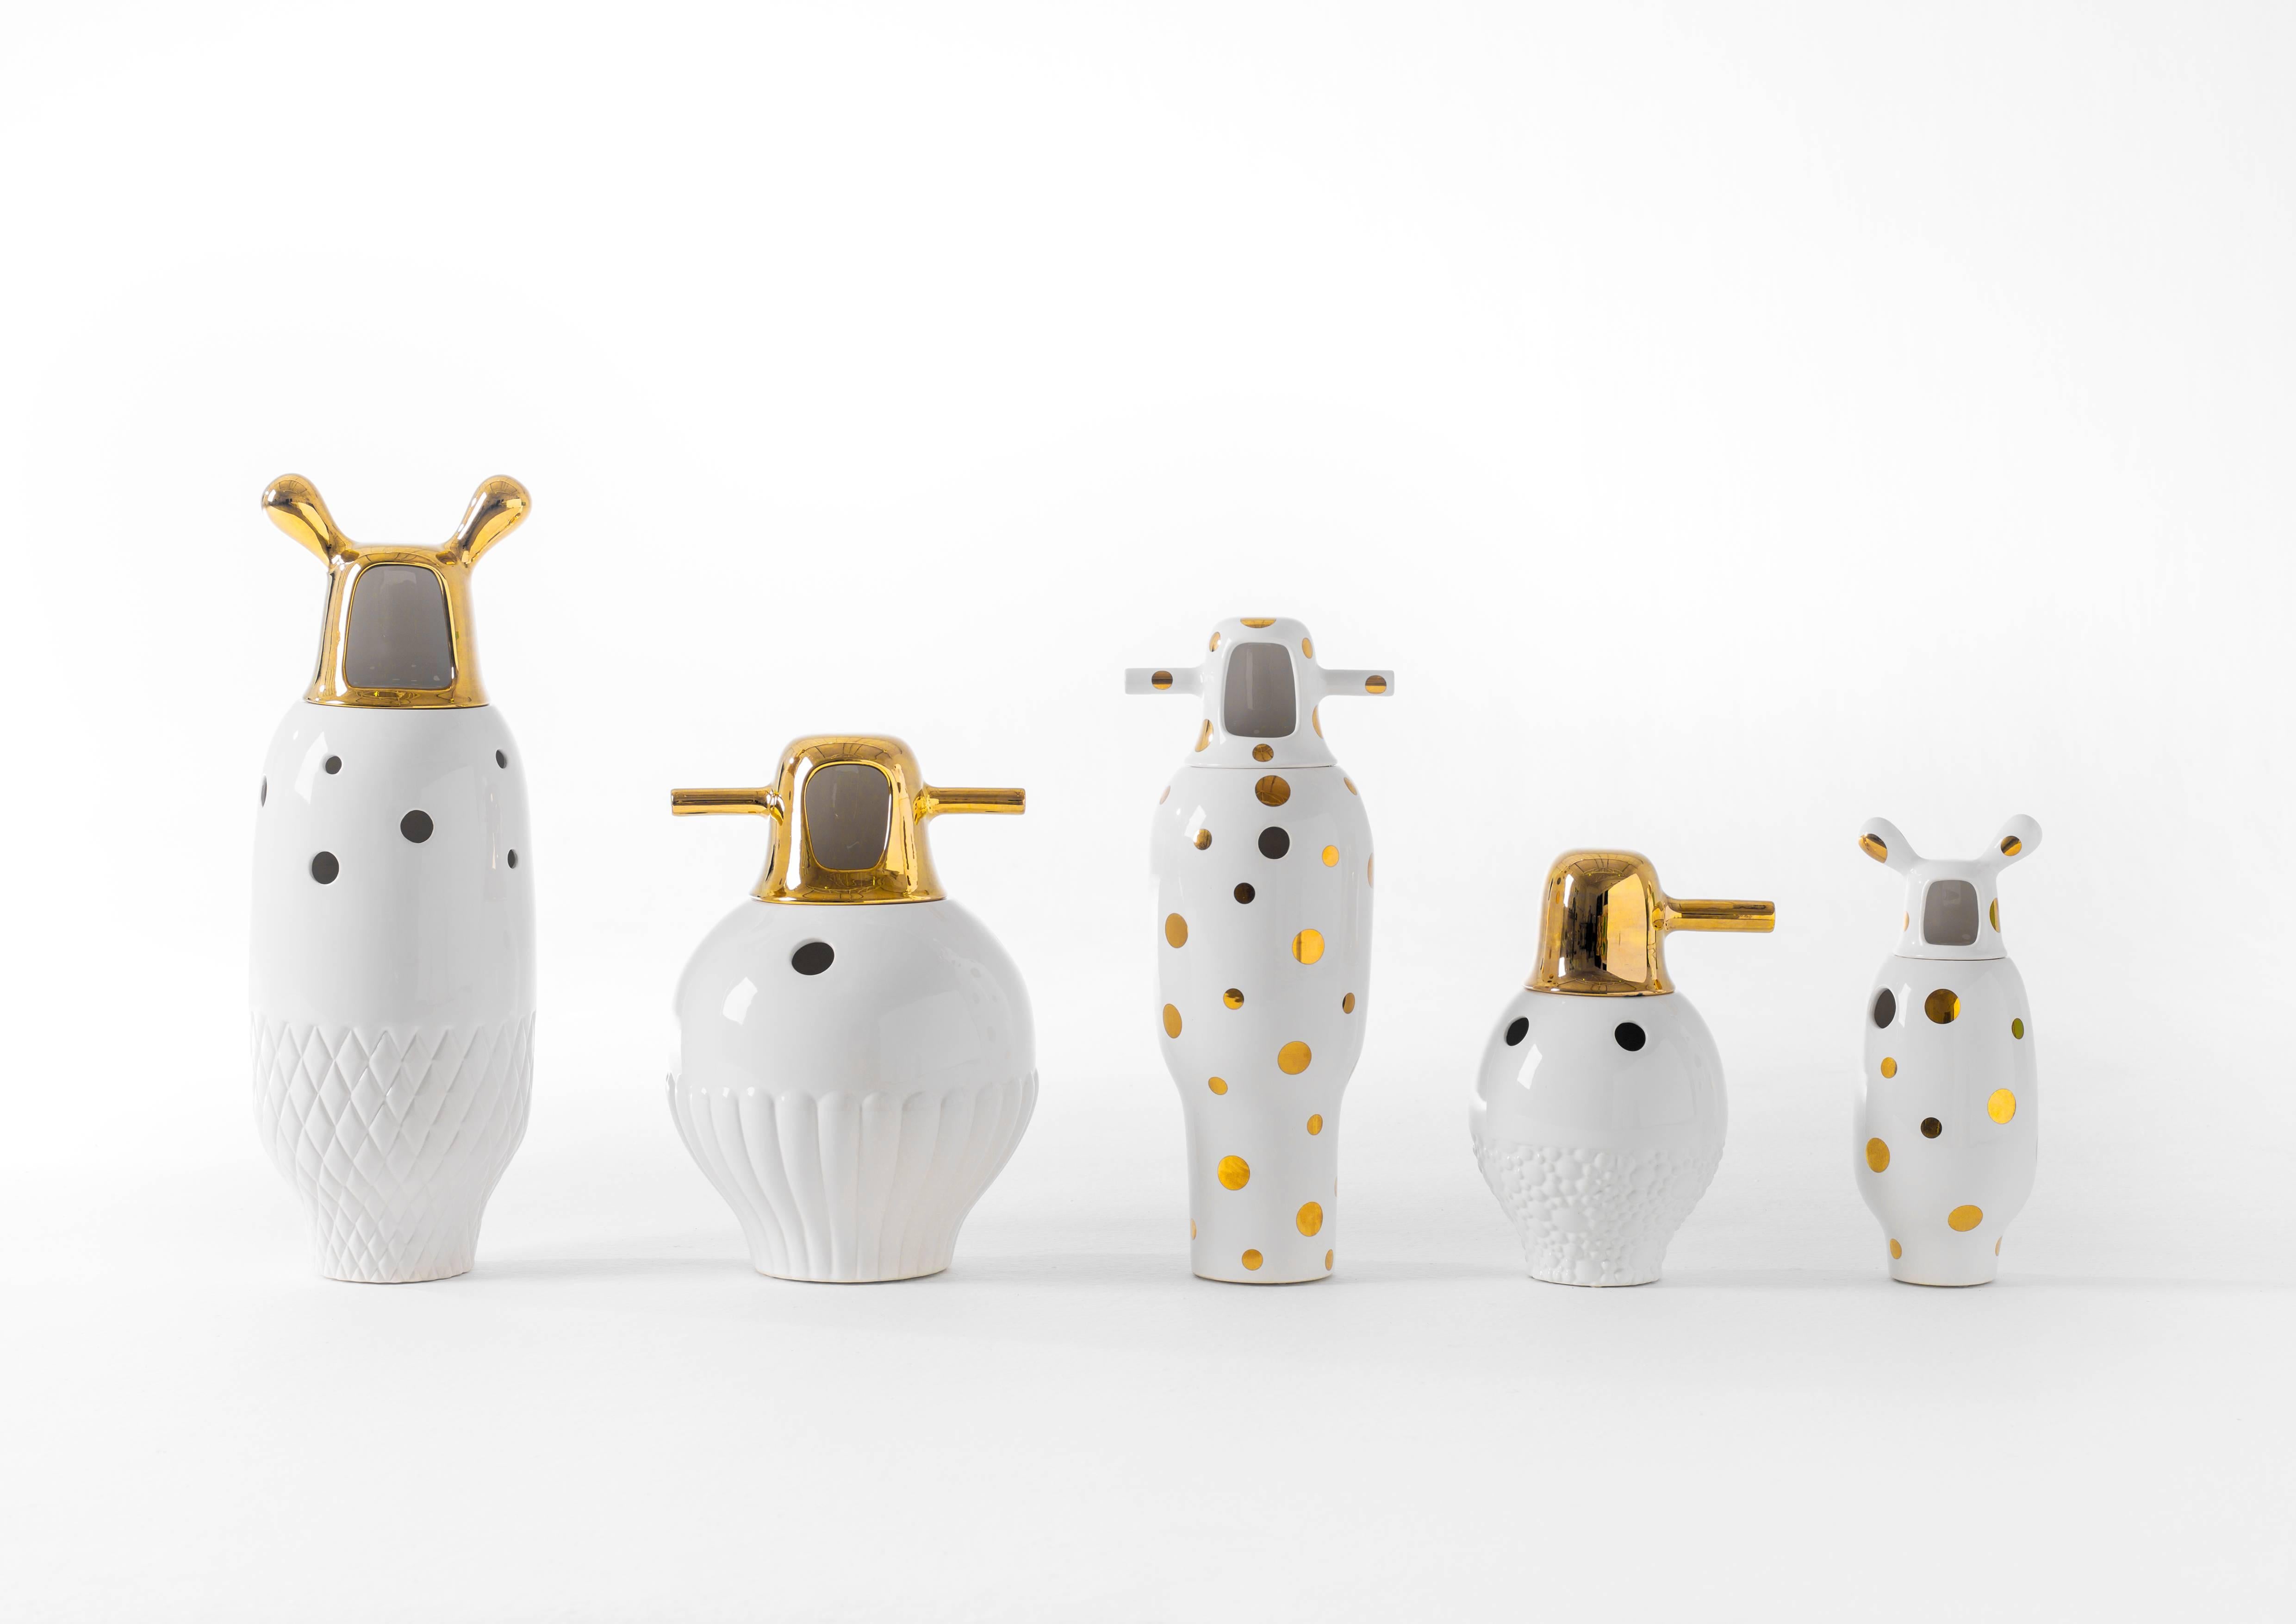 Vase by Jaime Hayon 
Glazed Stoneware 
white and Gold plated decorations

The Showtime vases by Jaime Hayon are the most iconic in BD’s catalogue. After completing 10 years, the vases have a new white enamel finish with decorations in 24 carat gold.